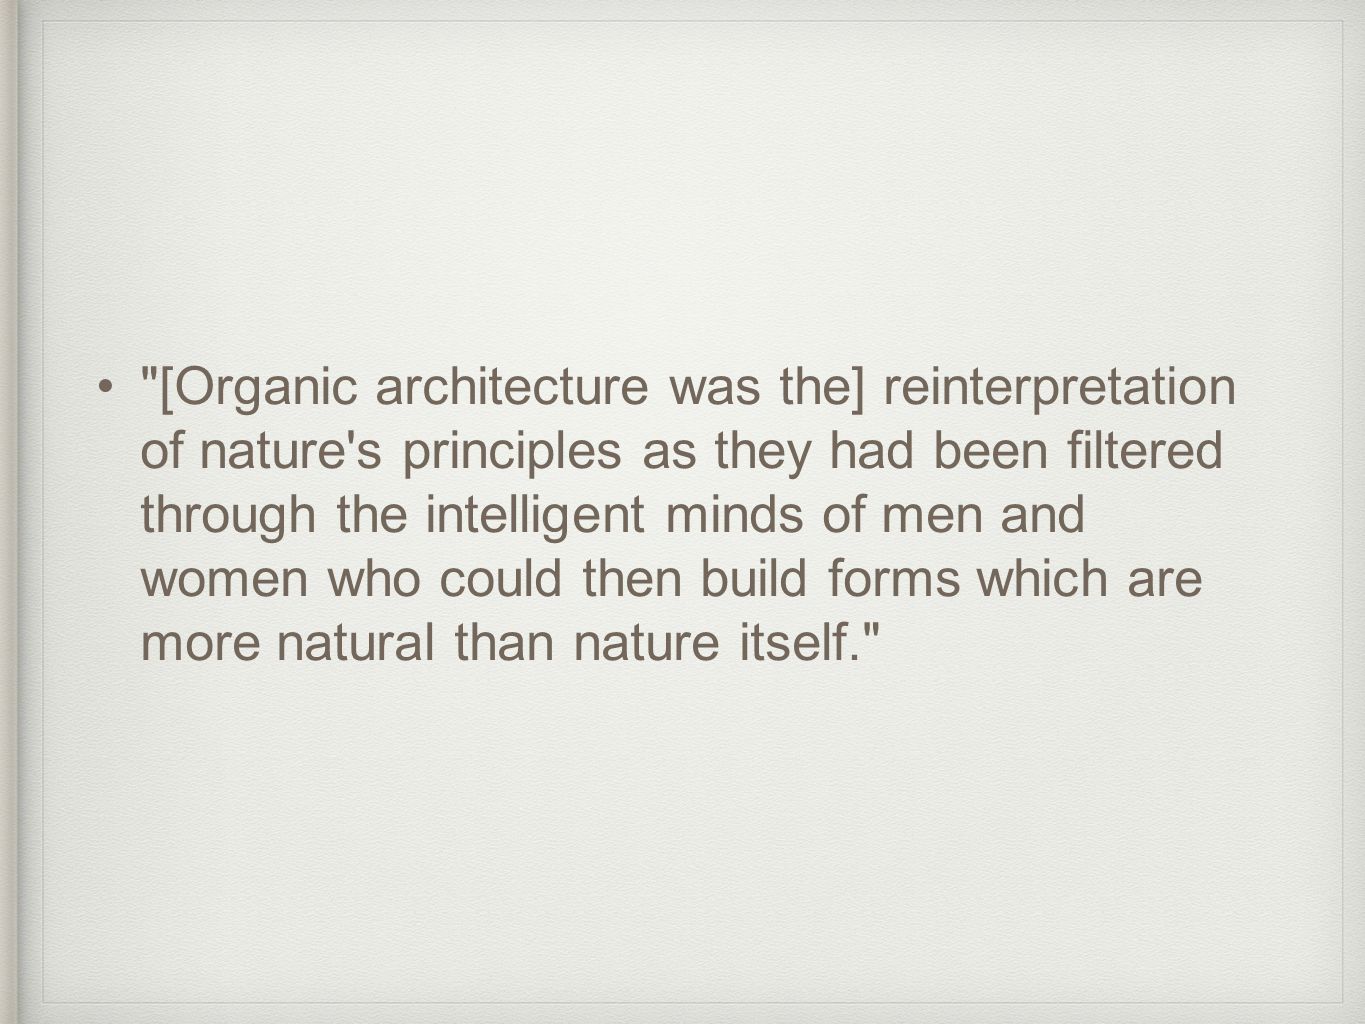 [Organic architecture was the] reinterpretation of nature s principles as they had been filtered through the intelligent minds of men and women who could then build forms which are more natural than nature itself.